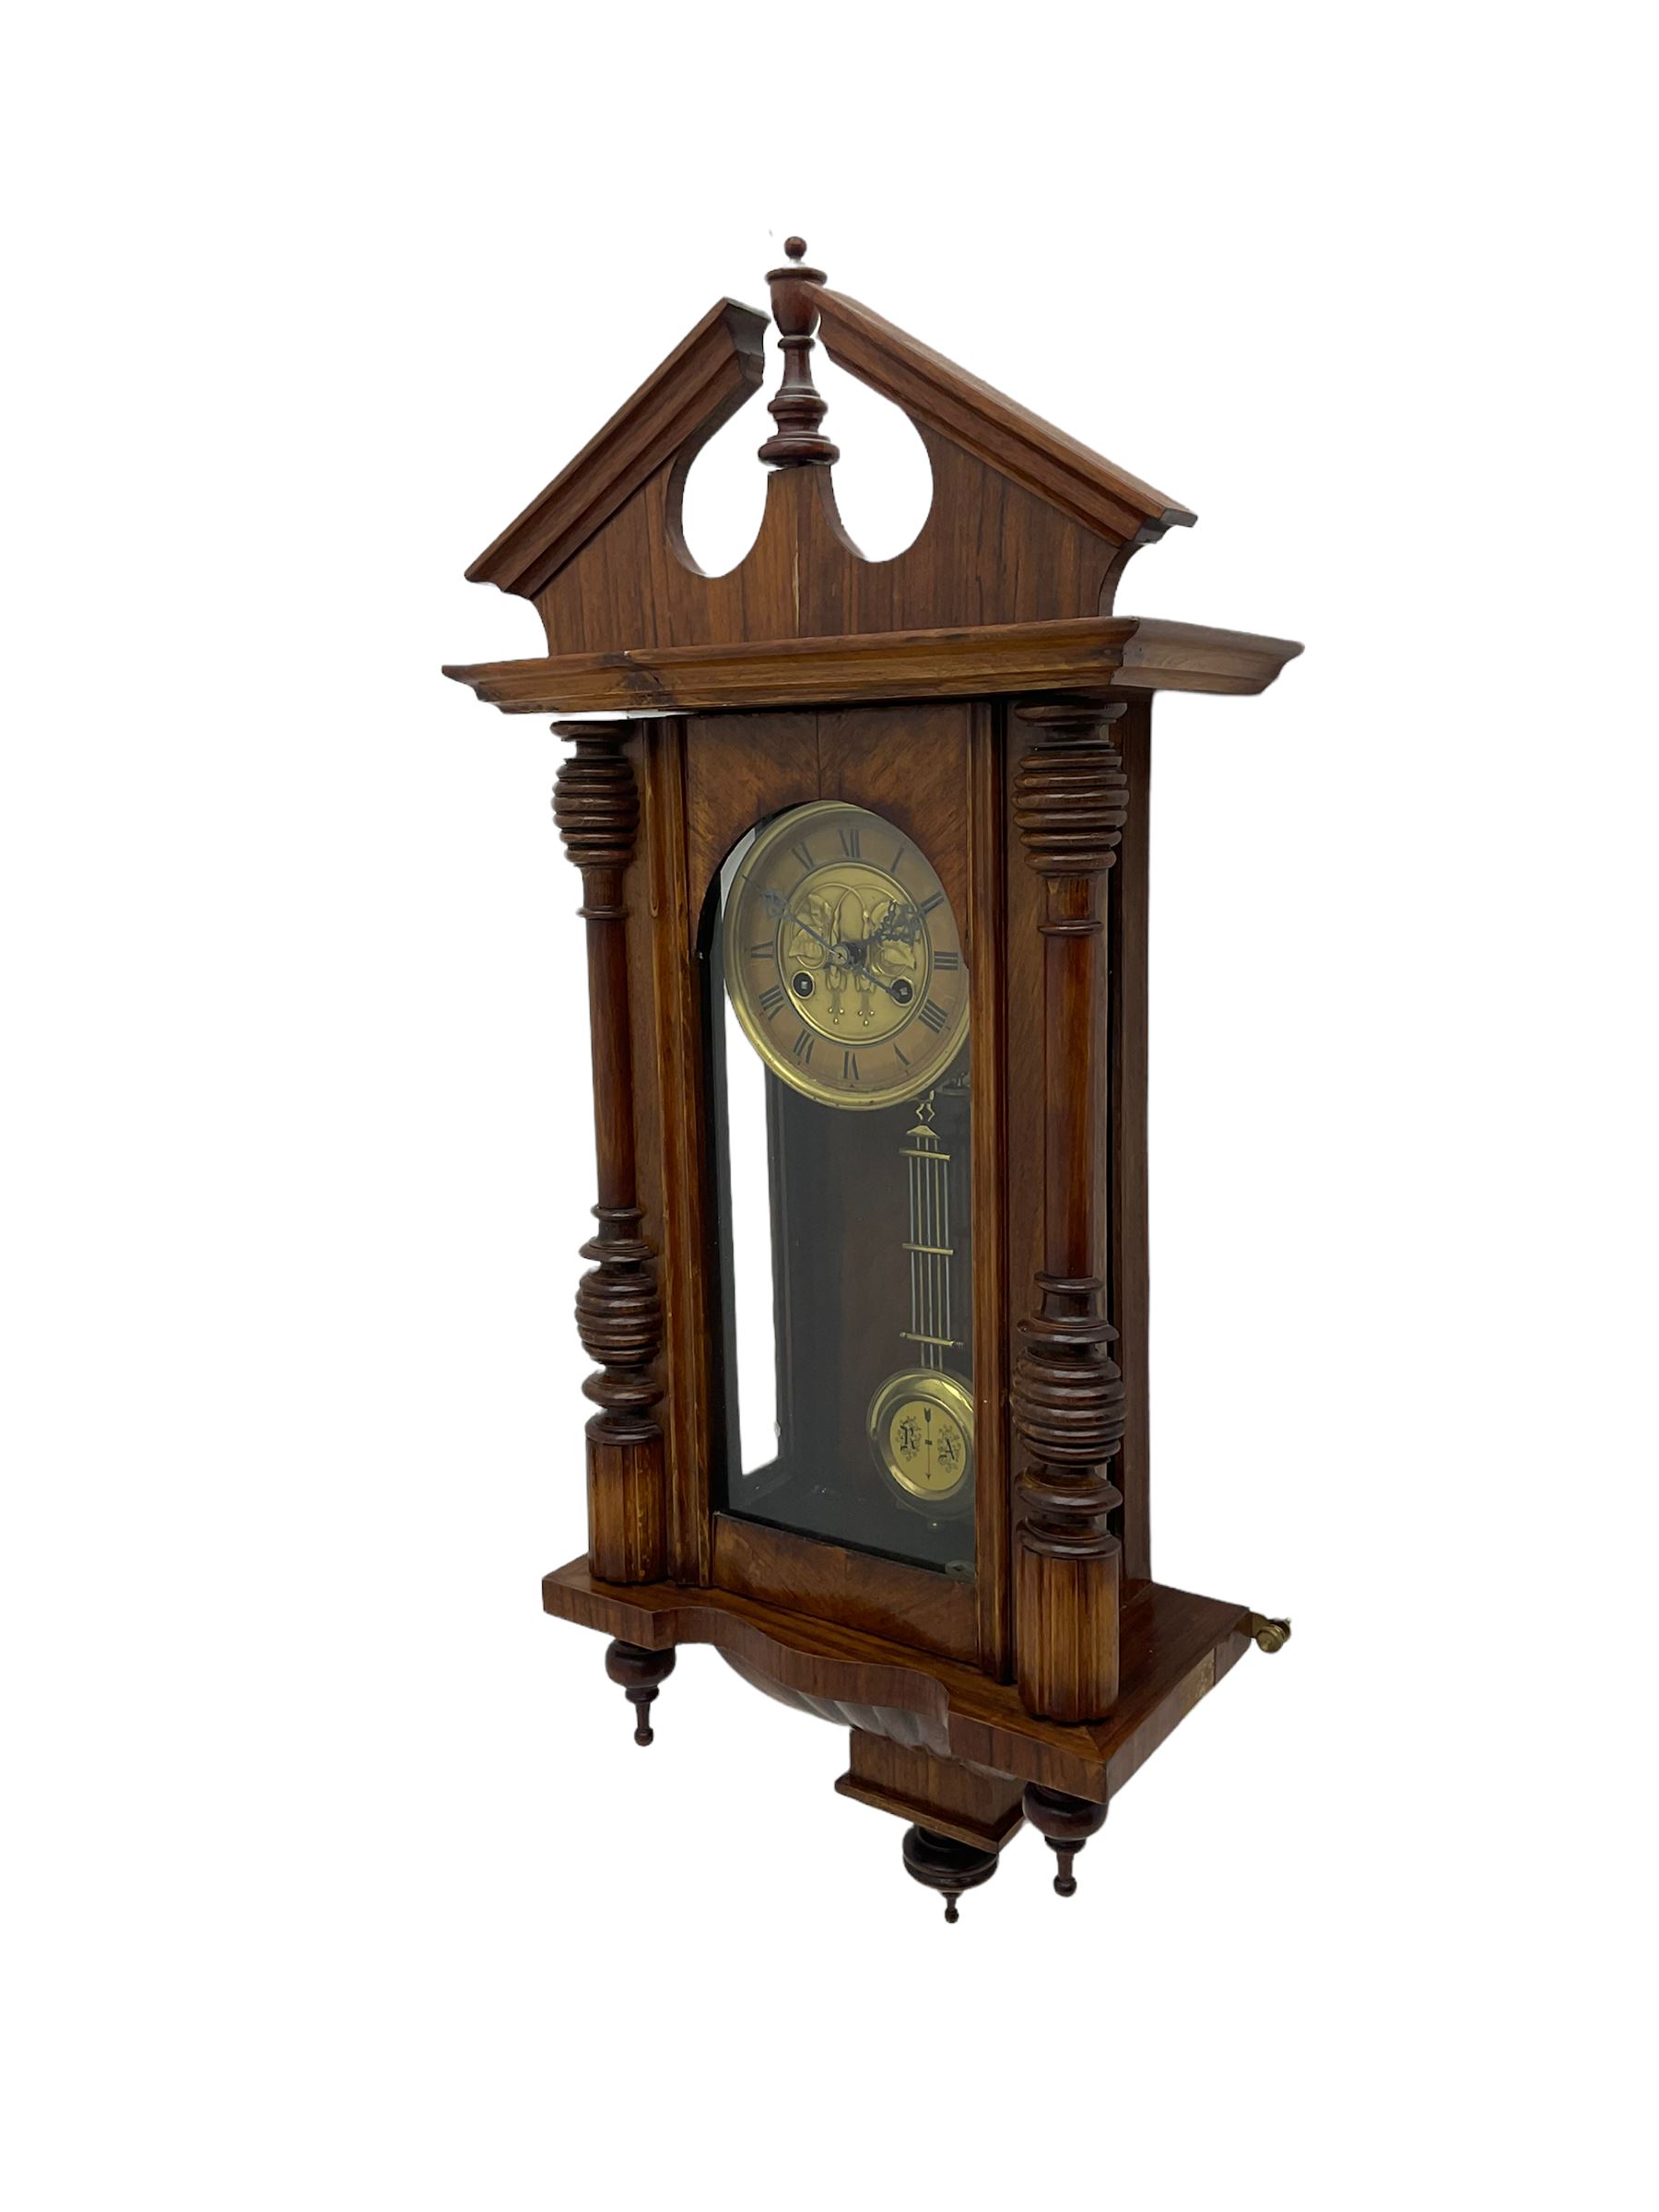 German early 20th century wall clock in a mahogany case with an architectural pediment and turned fi - Image 2 of 4